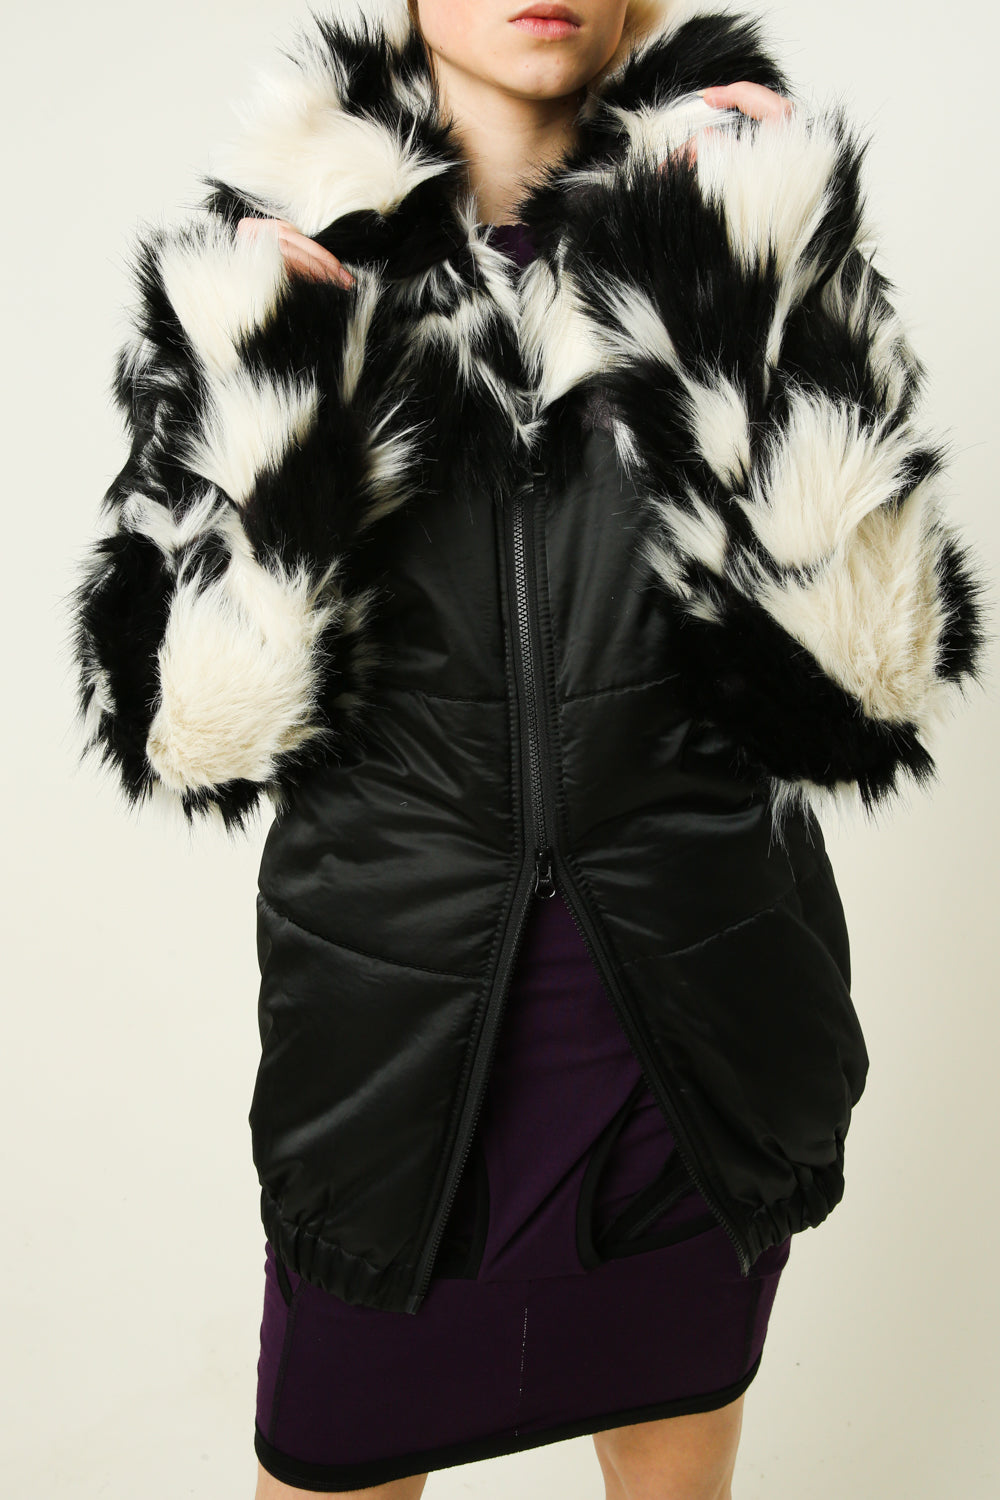 Jacket with faux fur trim on top